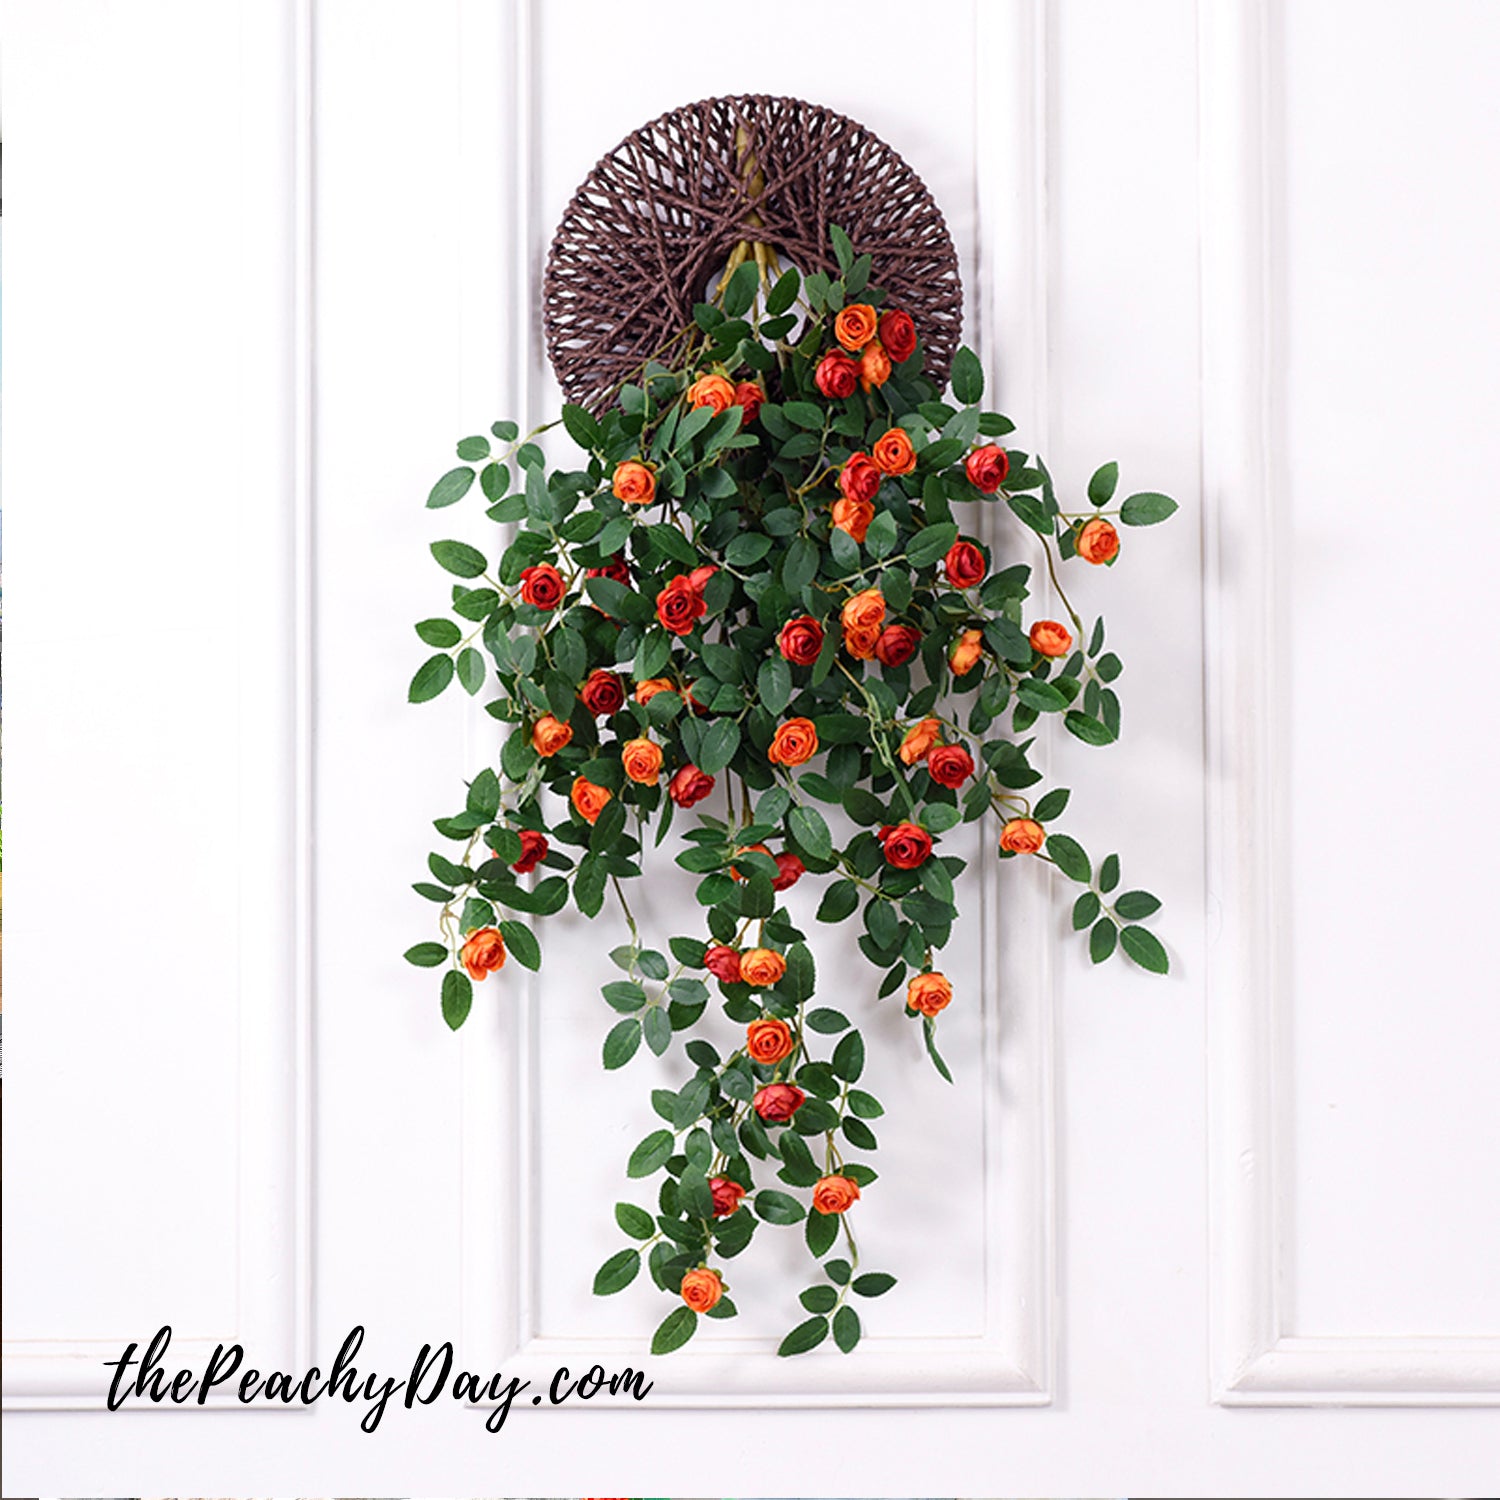 artificial hanging plants outdoor fall flowers outdoor artificial flowers and plants roses artificial flowers with hanging basket flower hanging basket